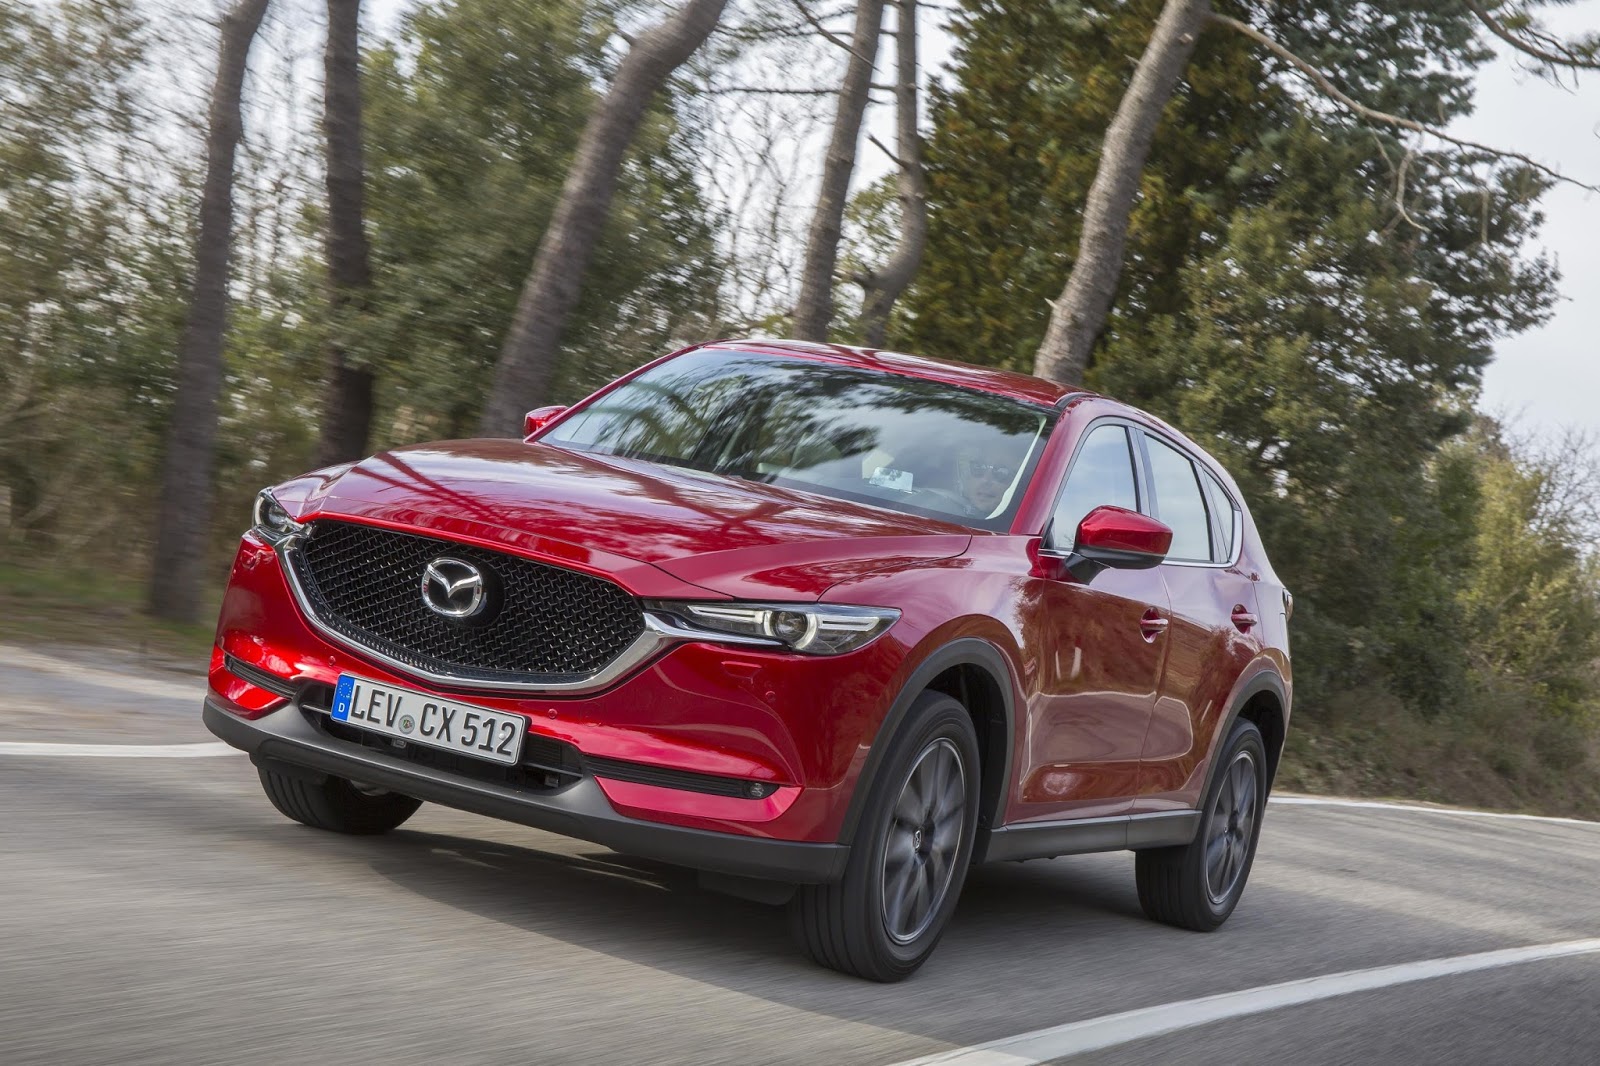 The Motoring World The All New Mazda Cx 5 Delivers New Levels Of